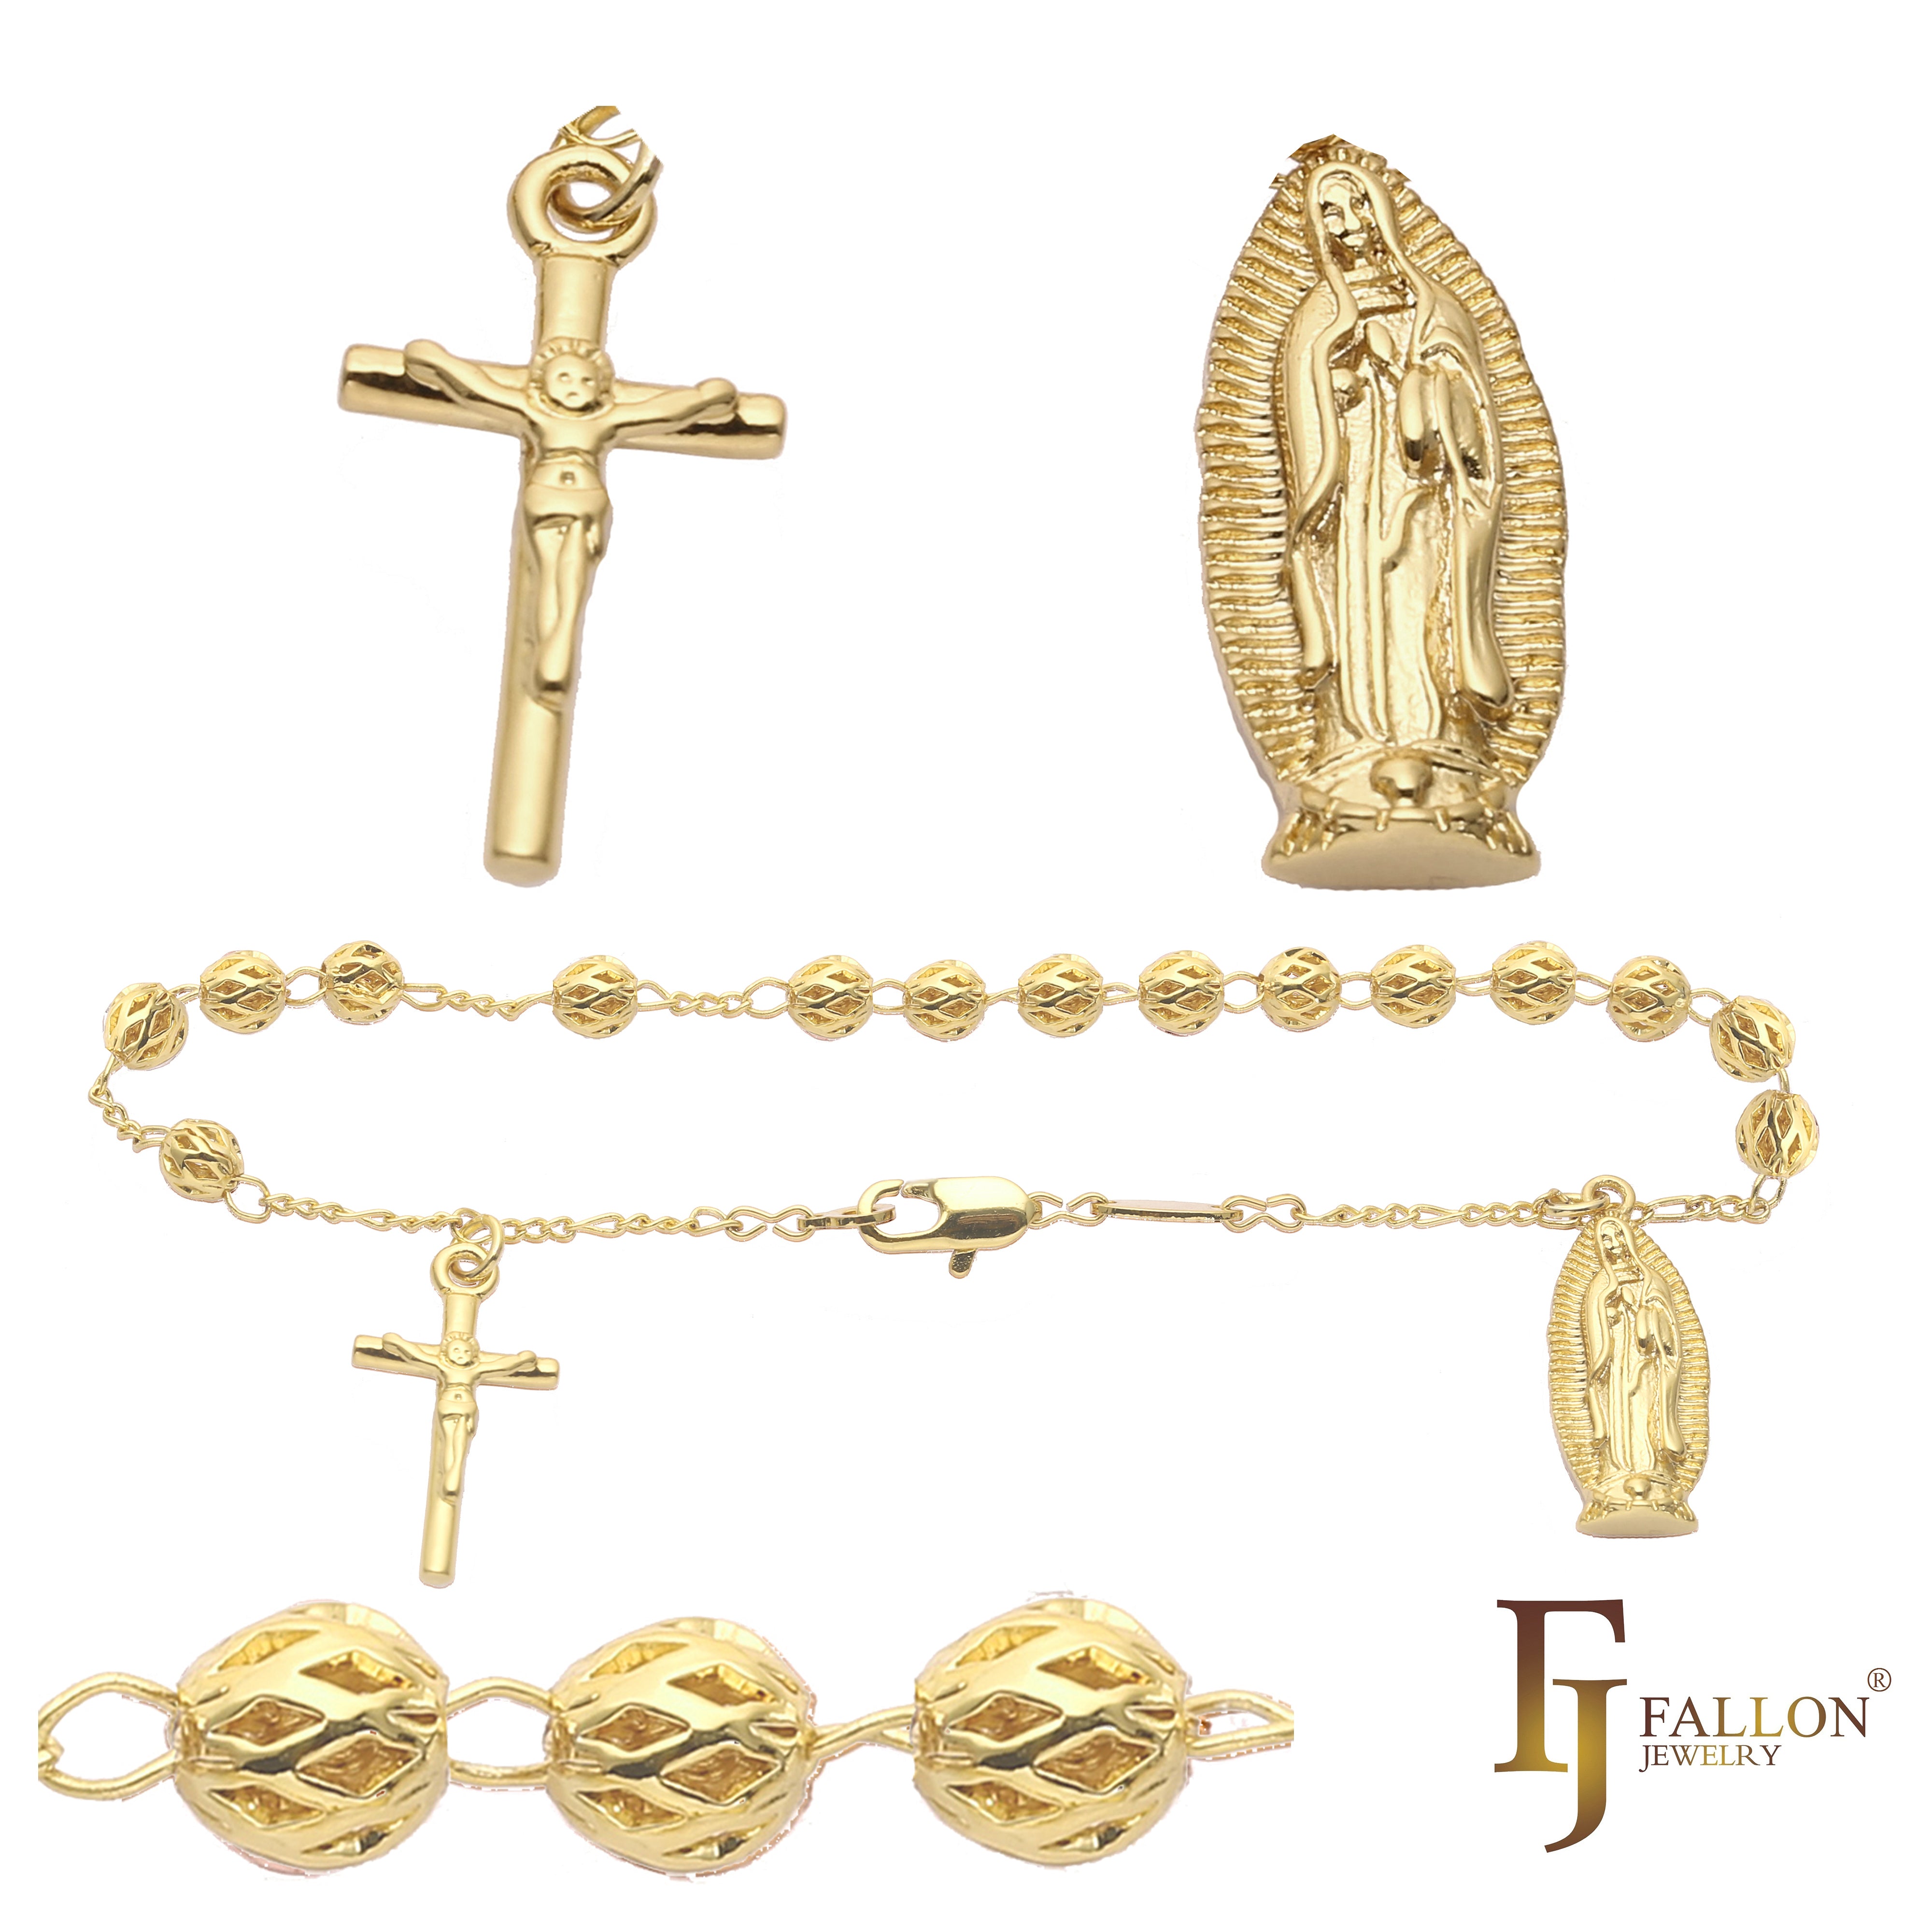 Italian Virgin of Guadalupe with Crucifix cross Catholic Rosary Necklace plated in 18K Gold, 14K Gold, 14K Gold two tone